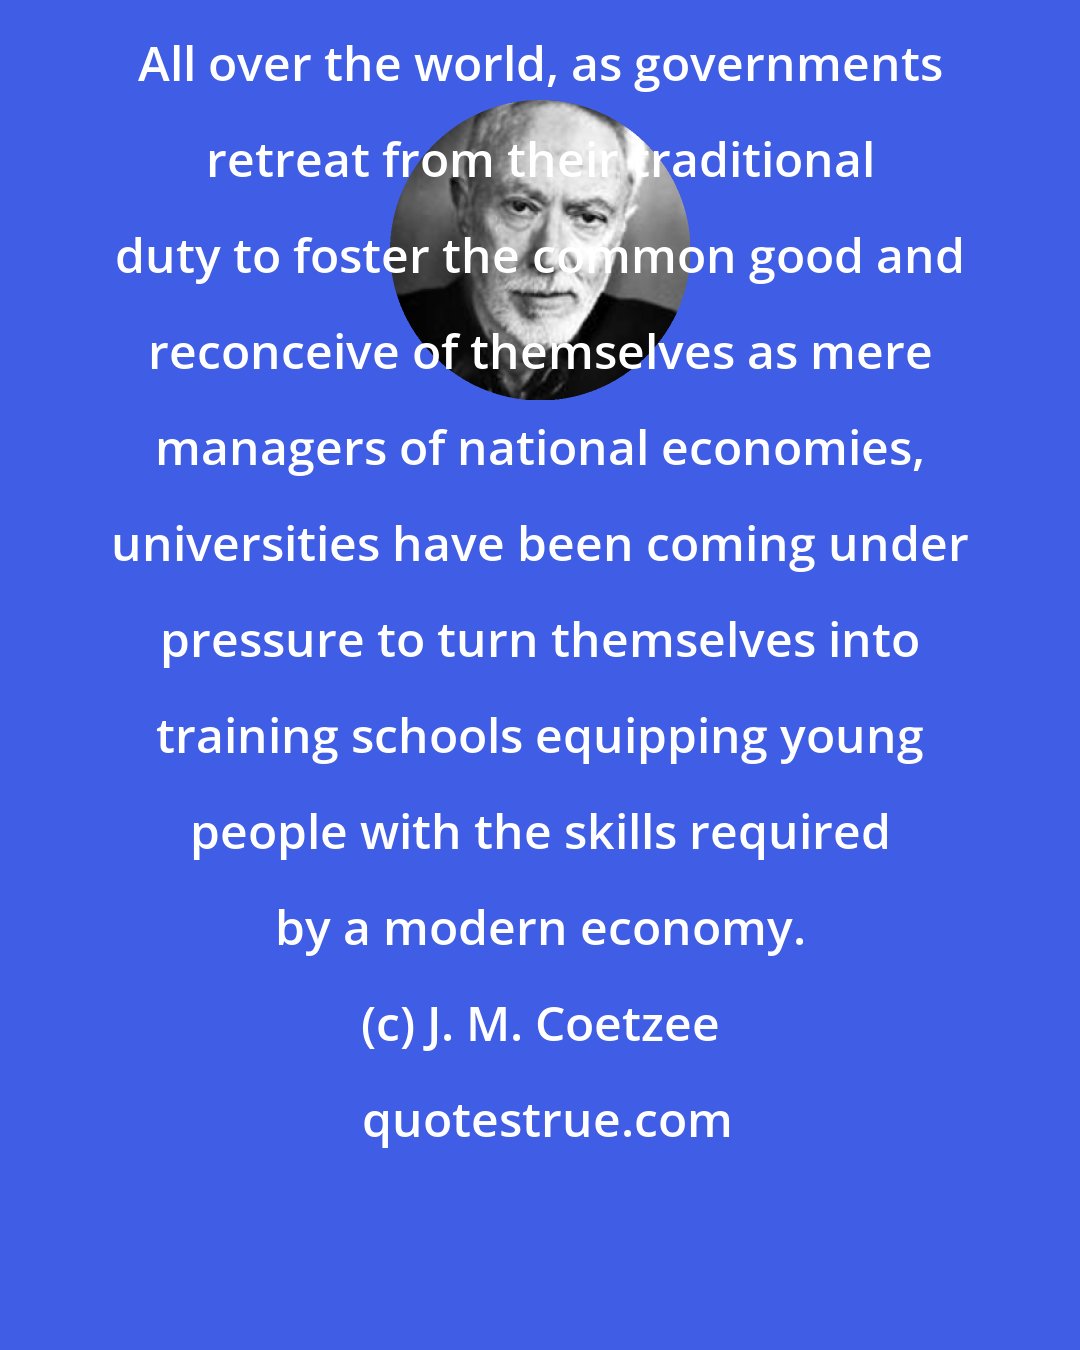 J. M. Coetzee: All over the world, as governments retreat from their traditional duty to foster the common good and reconceive of themselves as mere managers of national economies, universities have been coming under pressure to turn themselves into training schools equipping young people with the skills required by a modern economy.